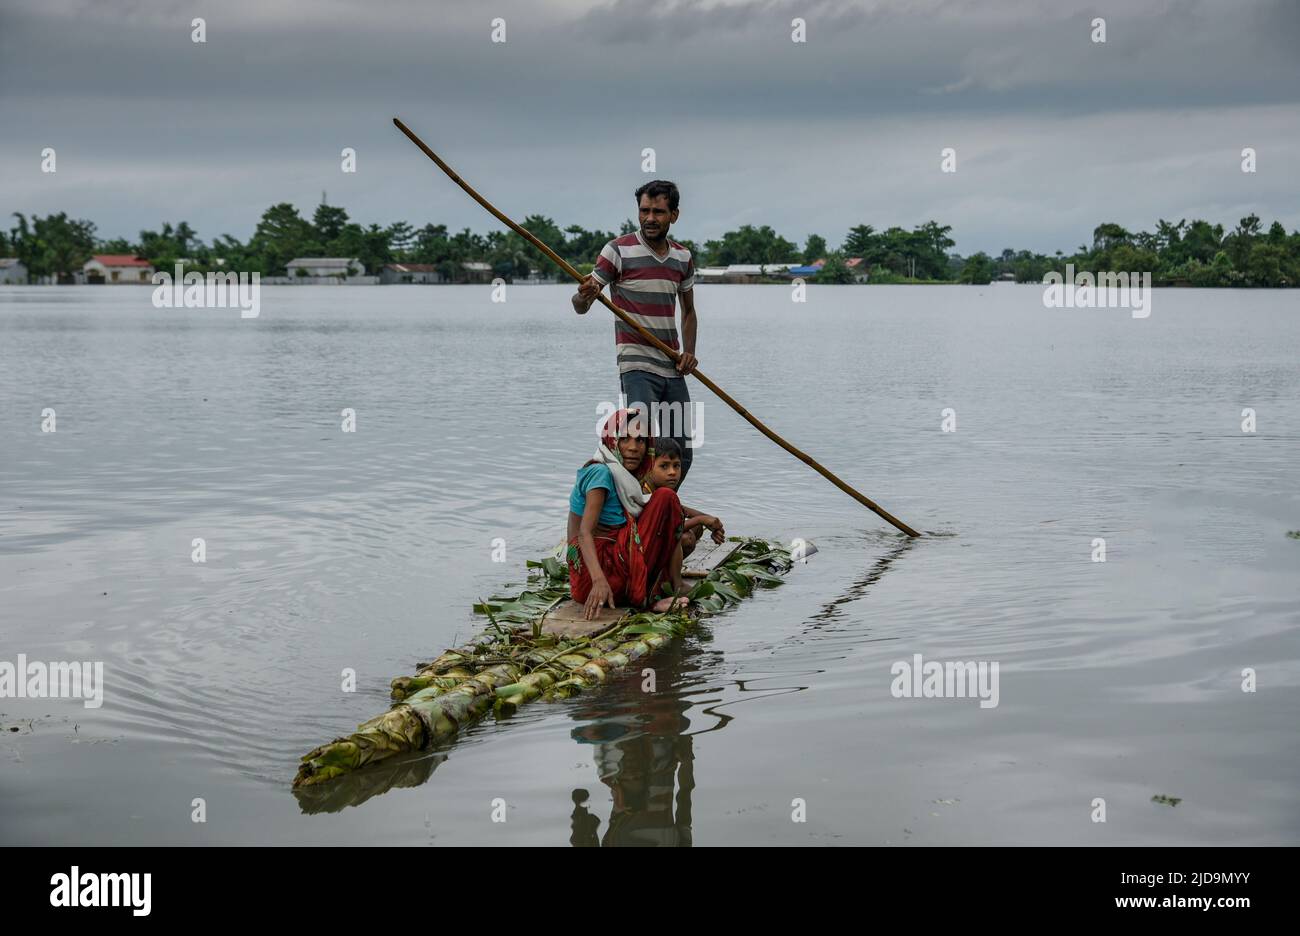 Flood affected people travel on a banana raft as they are going to a makeshift shelter, at a village on June 17, 2022 in Barpeta, India. Assam flood situation deteriorates due to heavy rain, over a million people affected. Stock Photo